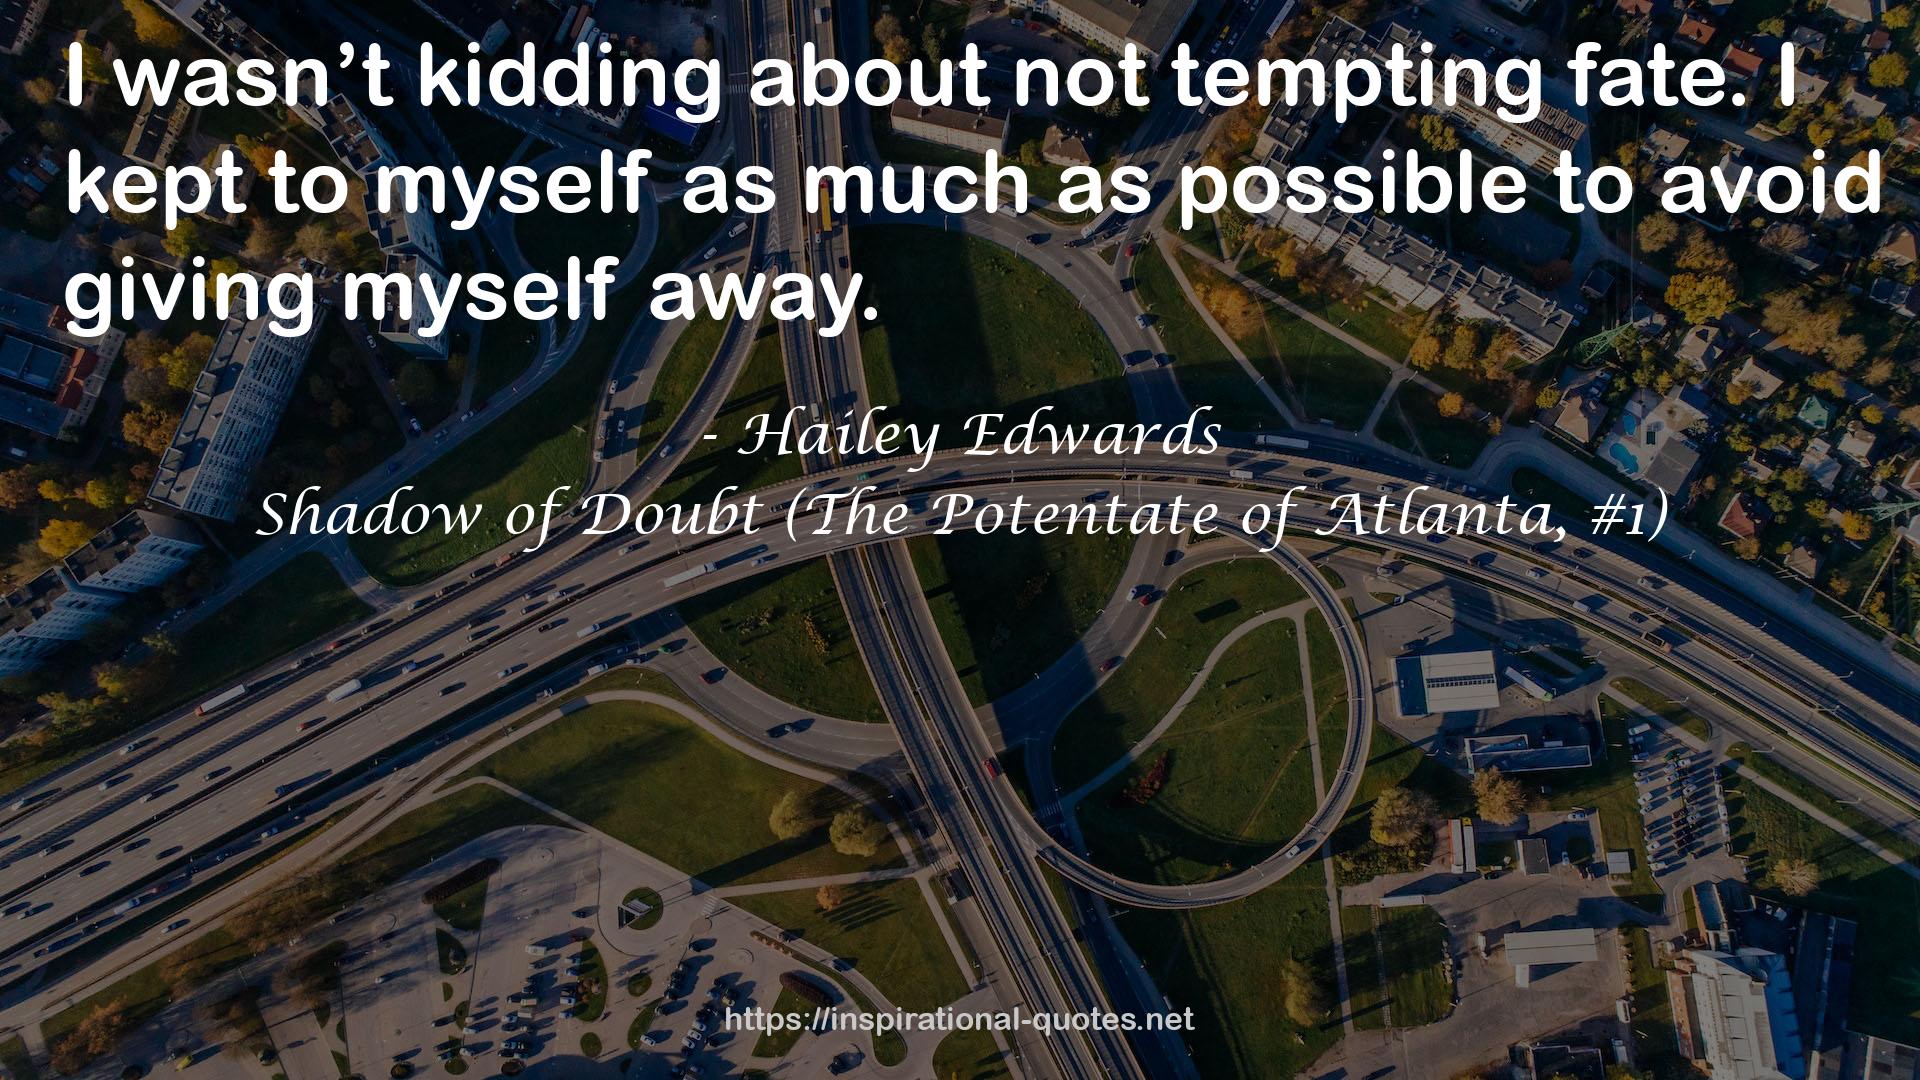 Shadow of Doubt (The Potentate of Atlanta, #1) QUOTES